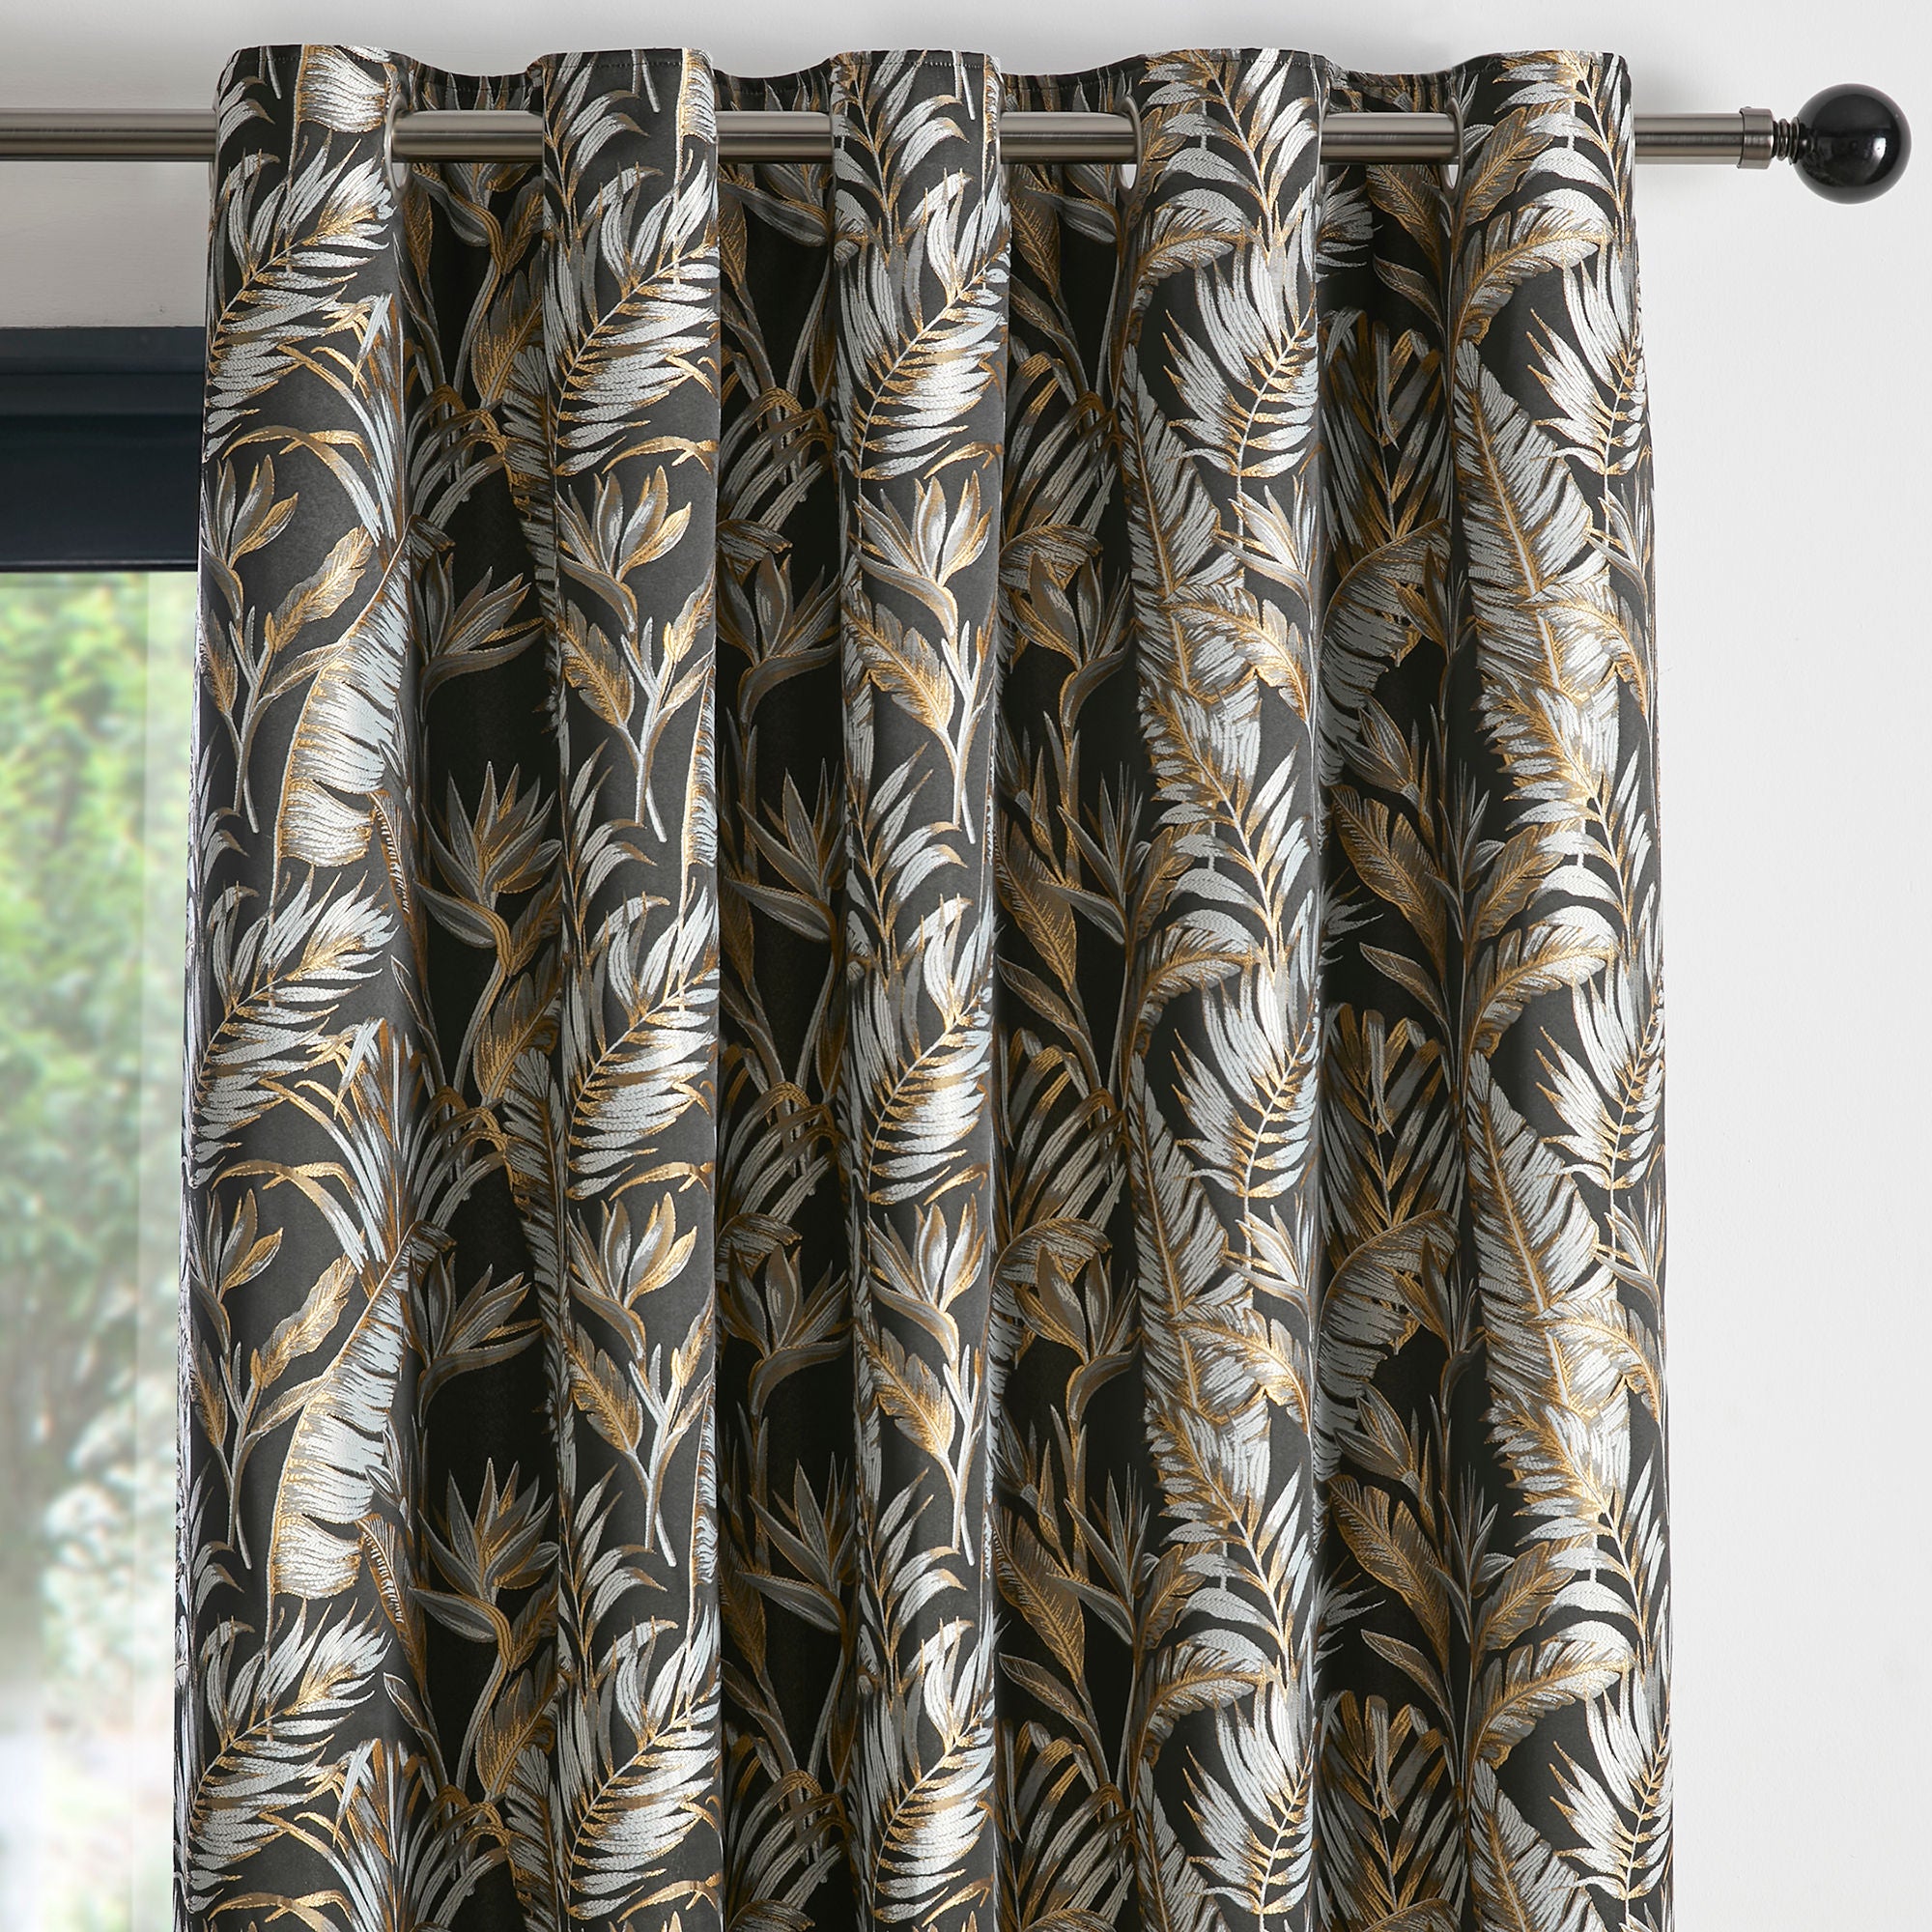 Paradise Palm Pair of Eyelet Curtains by Laurence Llewelyn-Bowen in Black - Pair of Eyelet Curtains - Laurence Llewelyn-Bowen